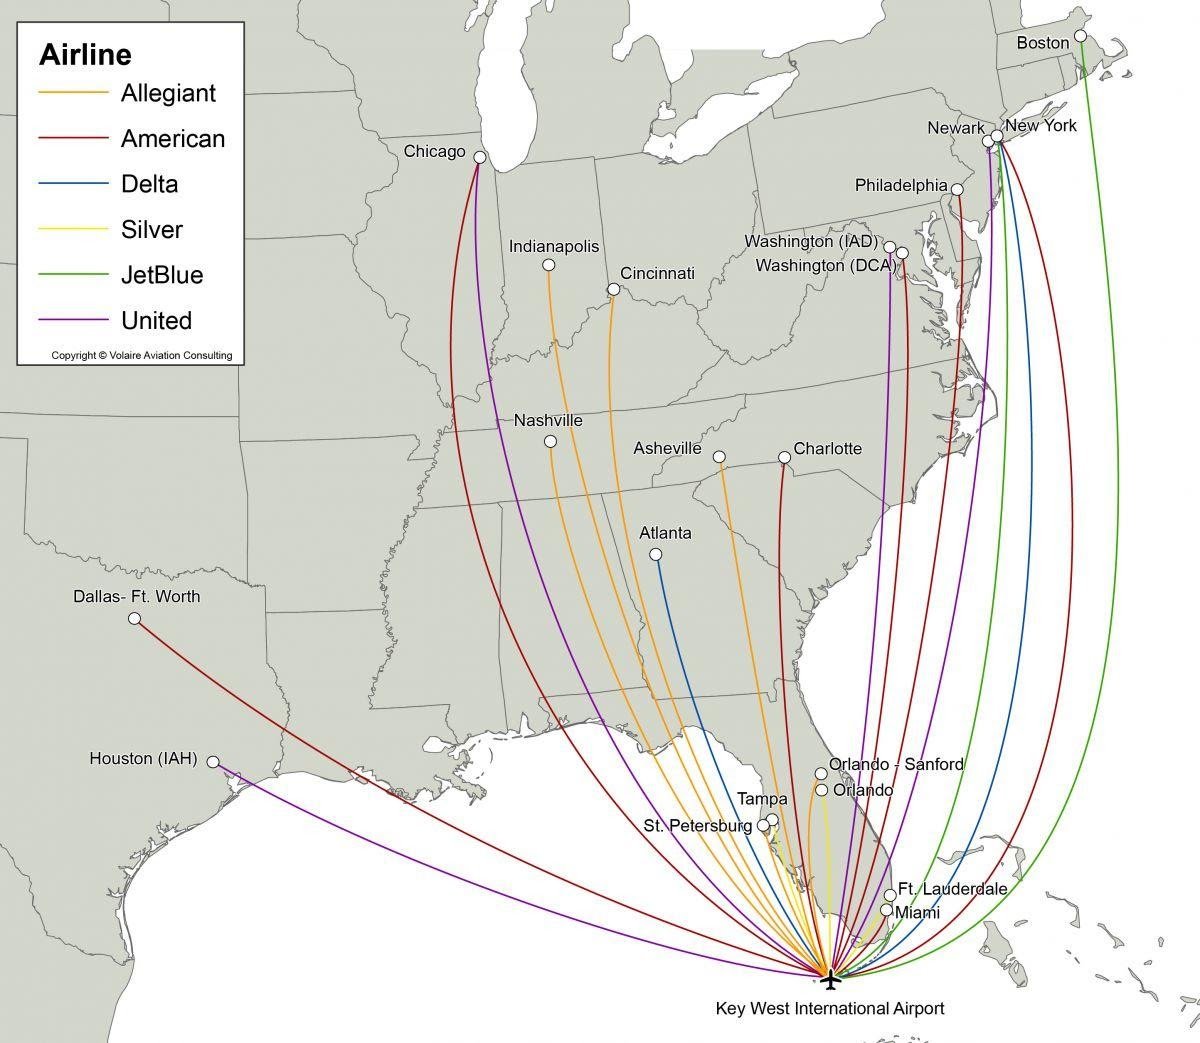 What Airlines Fly Direct To Key West?